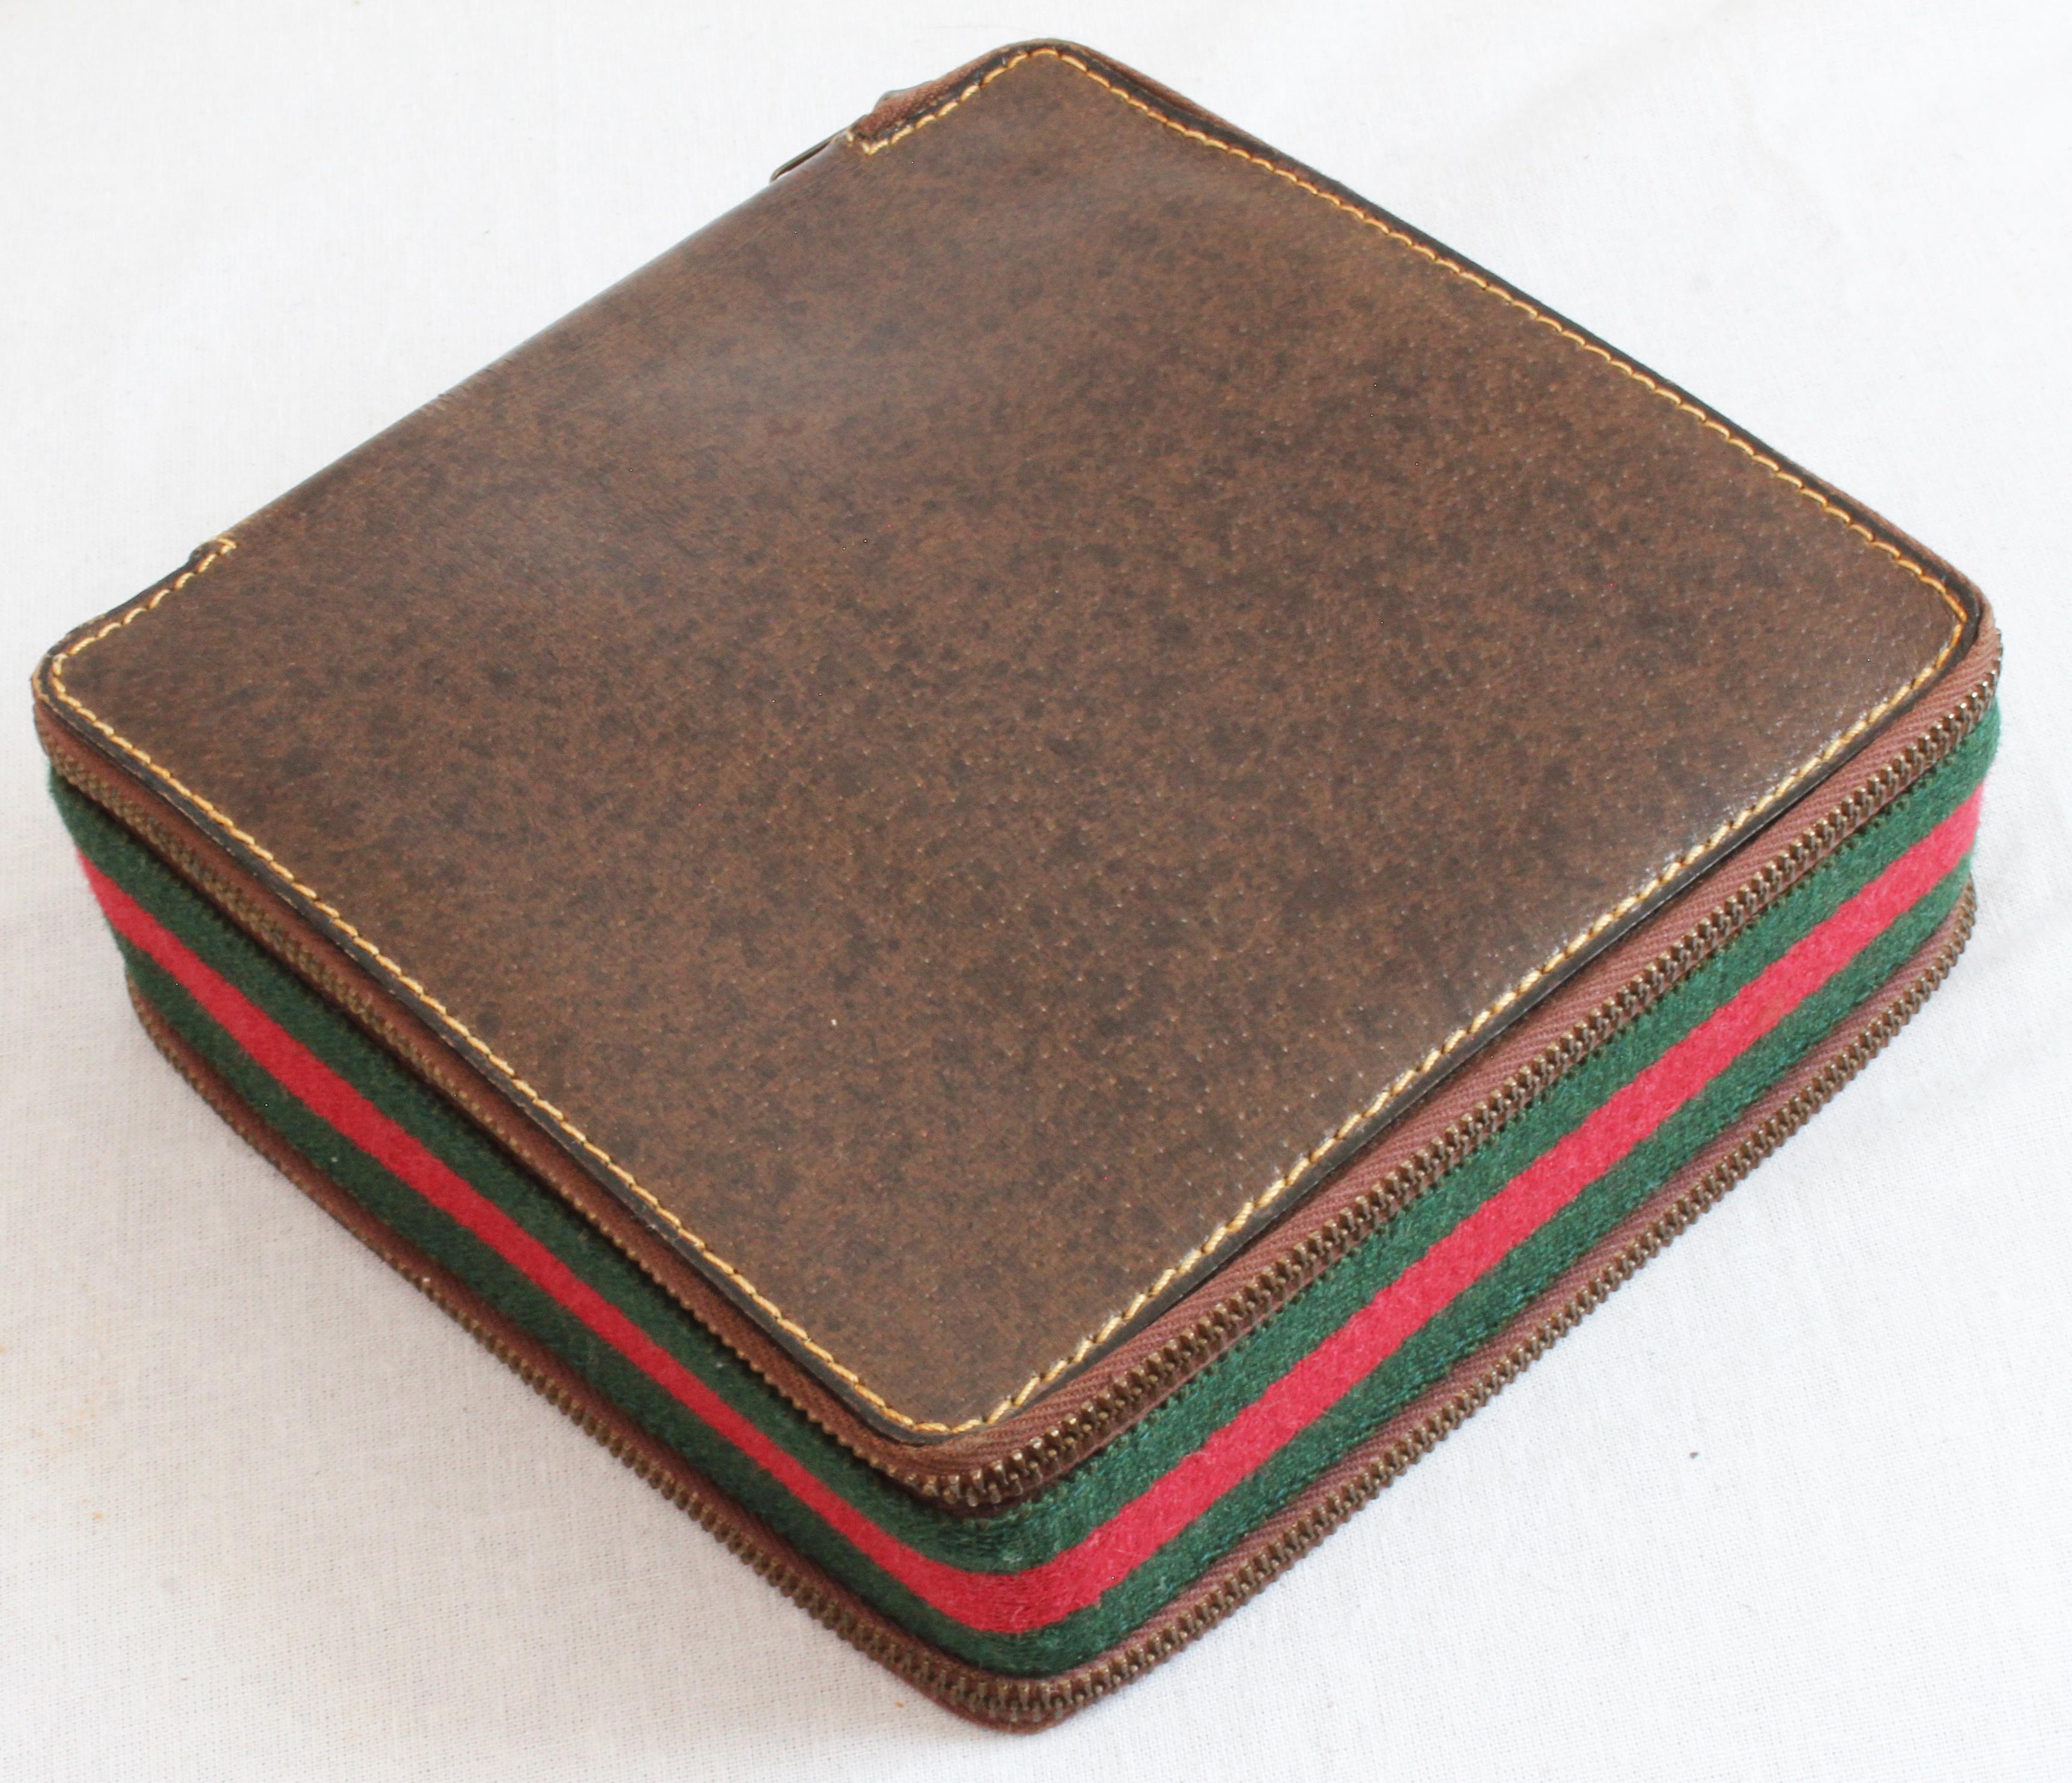 This travel game set was made by Gucci in the 1970s as a special order.  Made from brown leather, the case features their signature webbing at the center and zippers on each side: one side holds two decks of playing cards and 7 dice, and the other